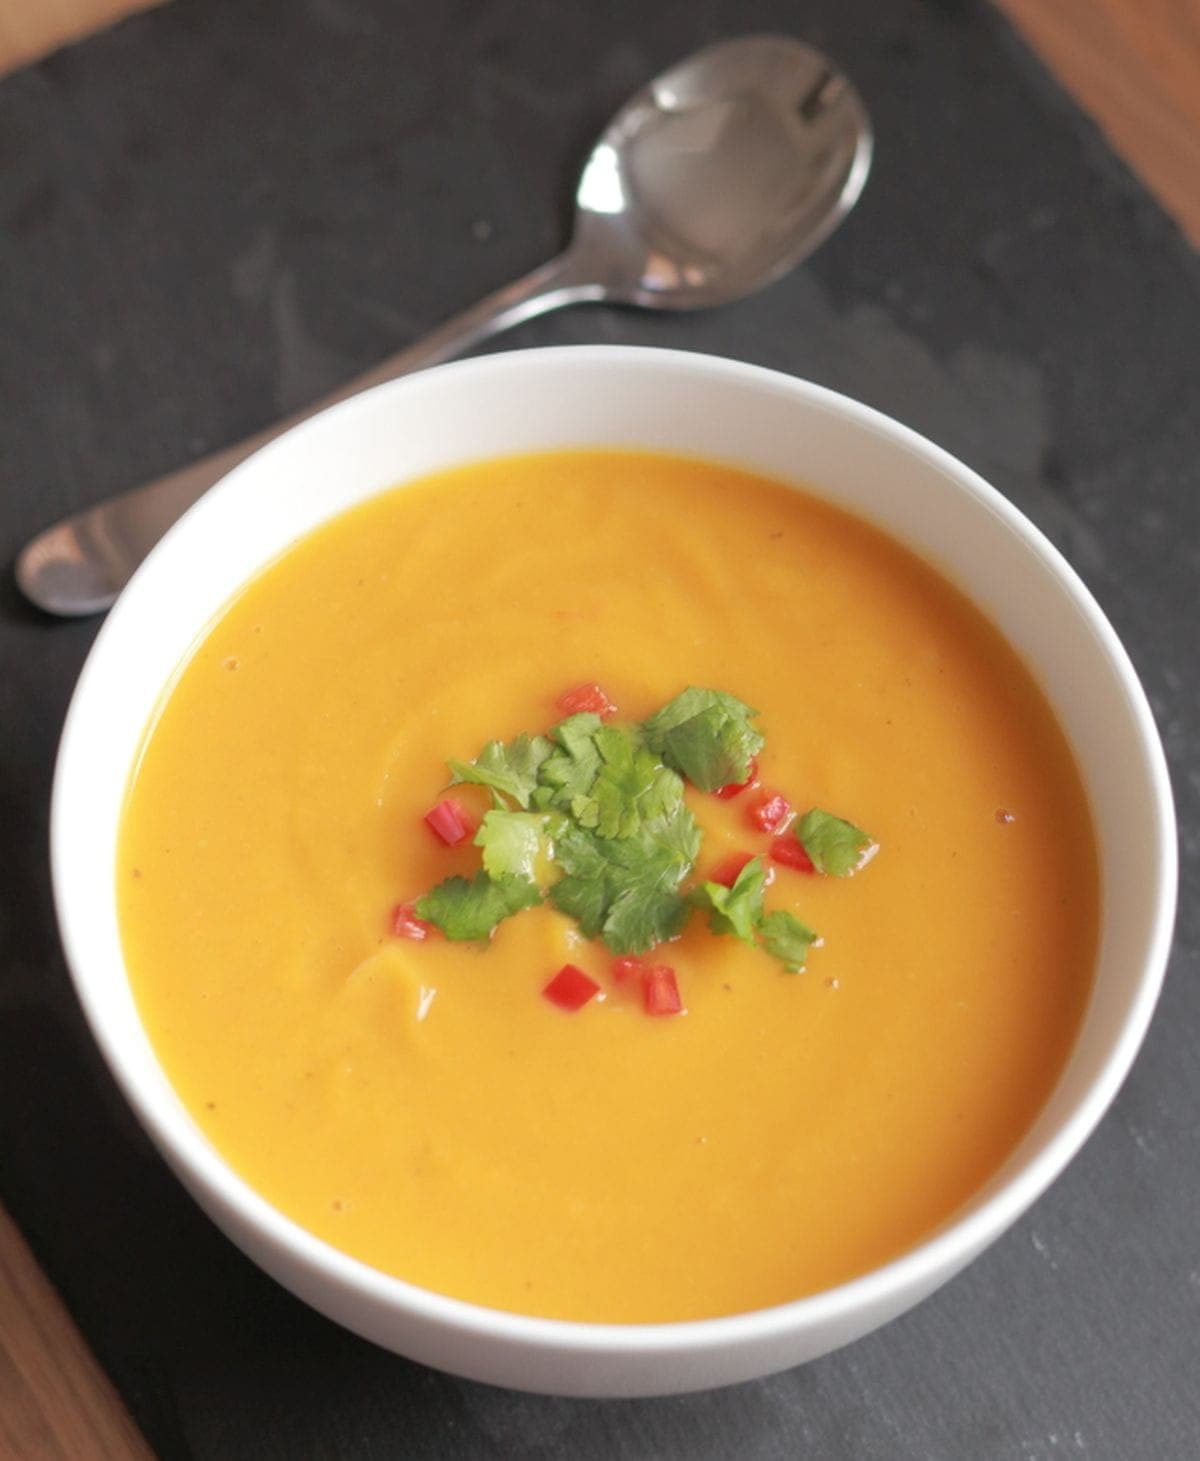 A bowl of sweet potato garlic and chilli soup garnished with chopped red chillies and coriander.